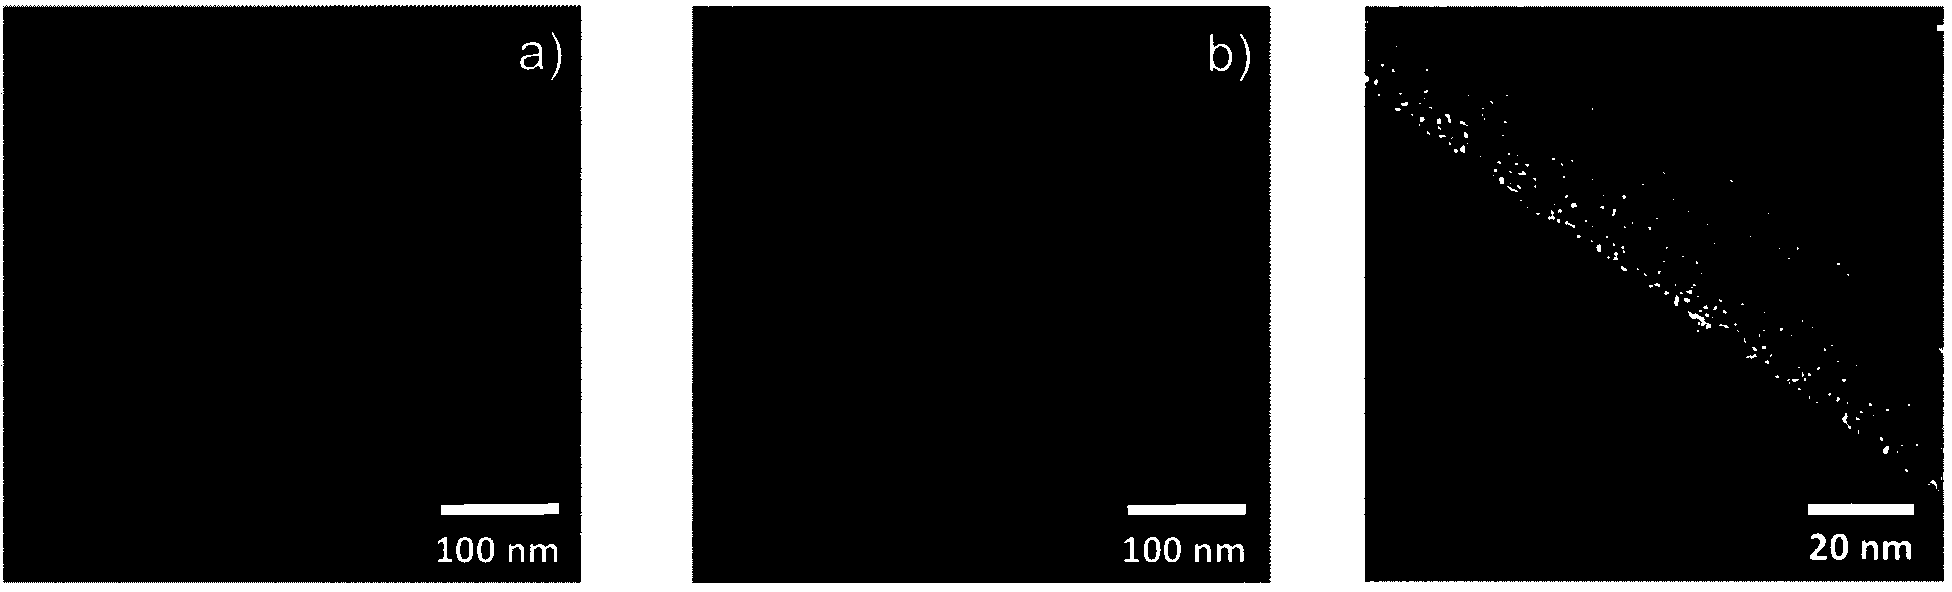 Substrate surface structured with thermally stable metal alloy nanoparticles, method for preparing the same and uses thereof, in particular as catalyst